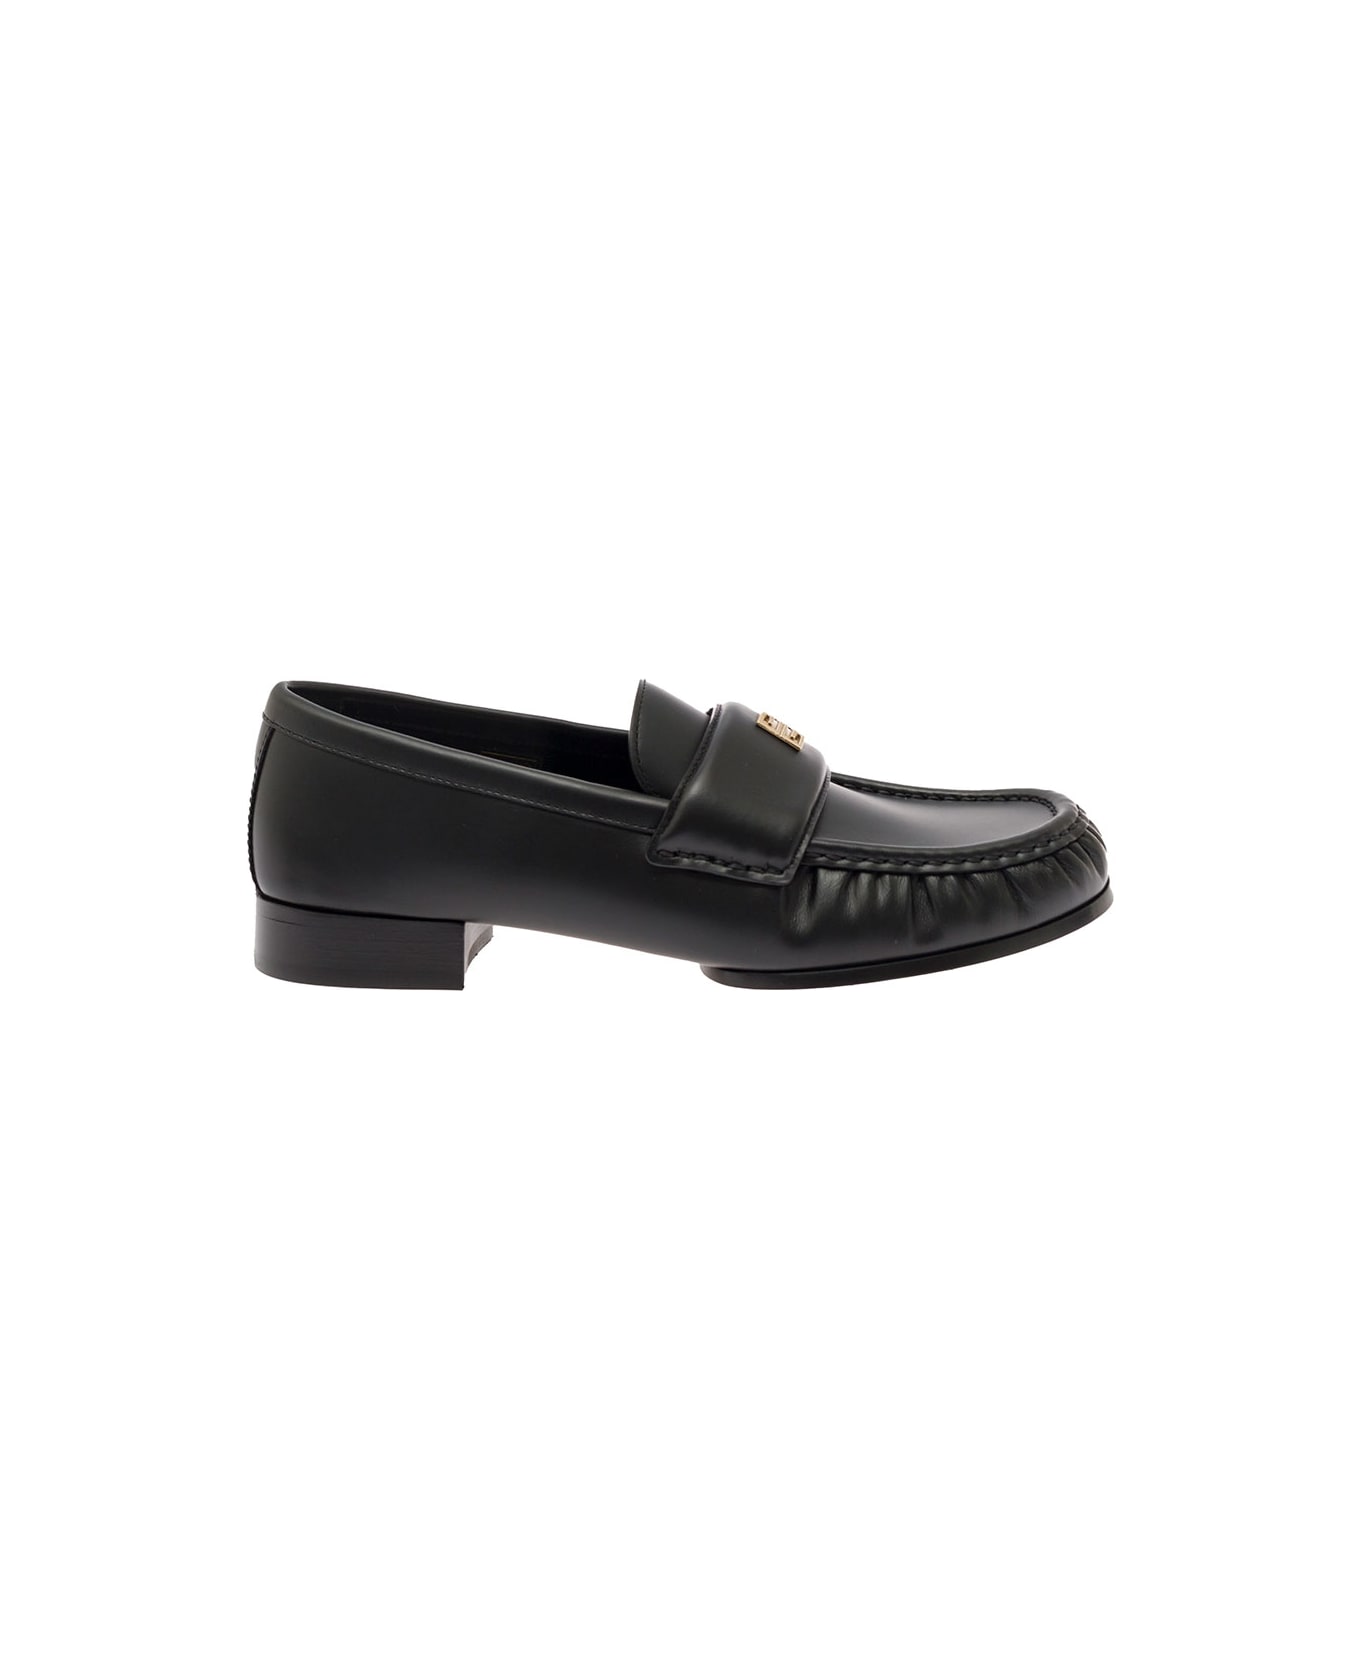 Givenchy Black Loafers With Logo Detail In Smooth Leather Woman - BLACK